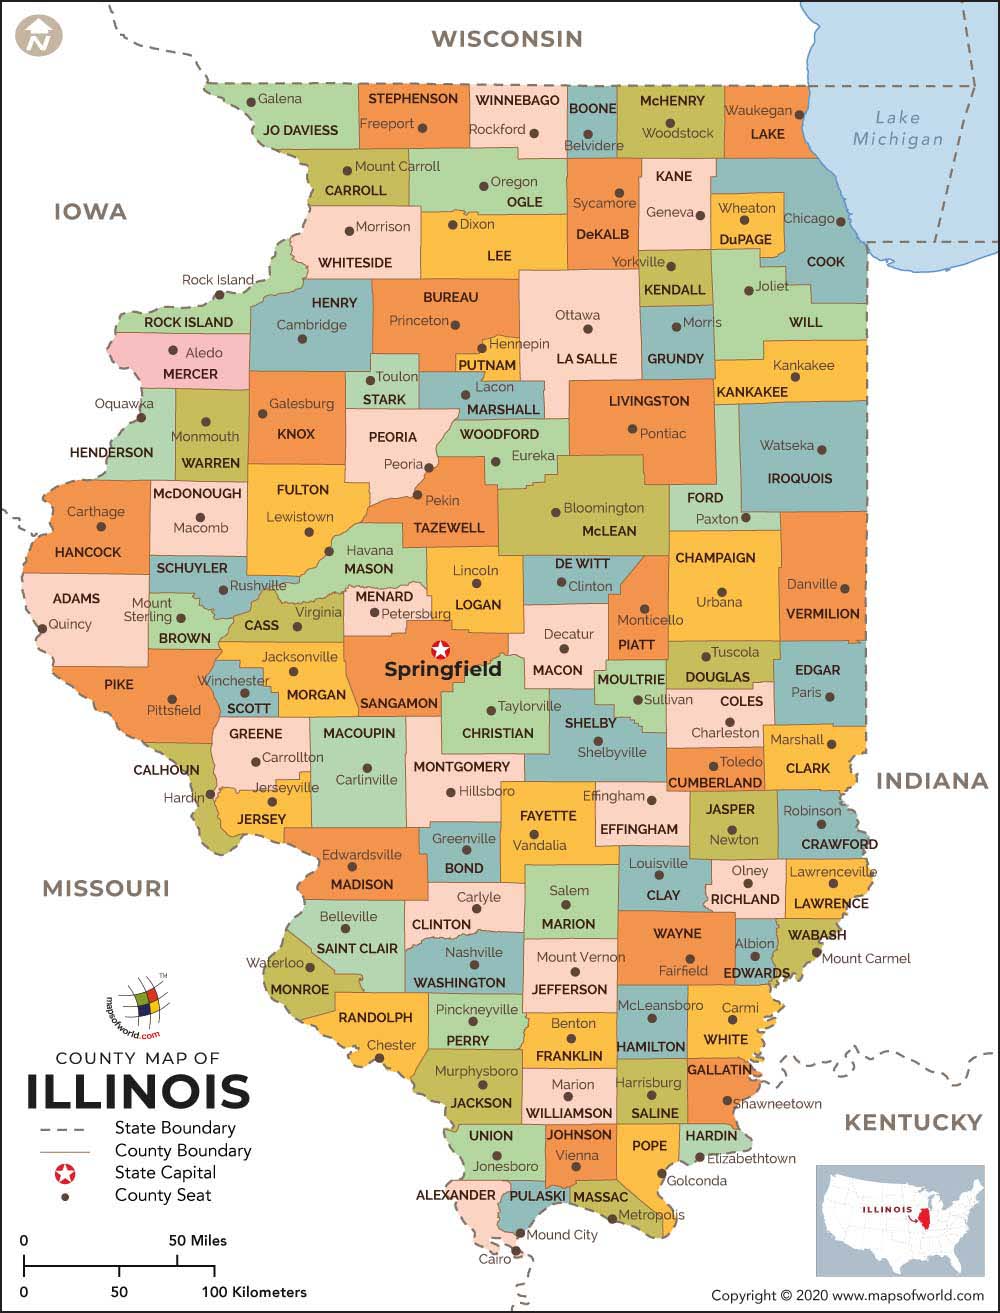 Illinois County Map Illinois Counties Map Of Counties In Illinois